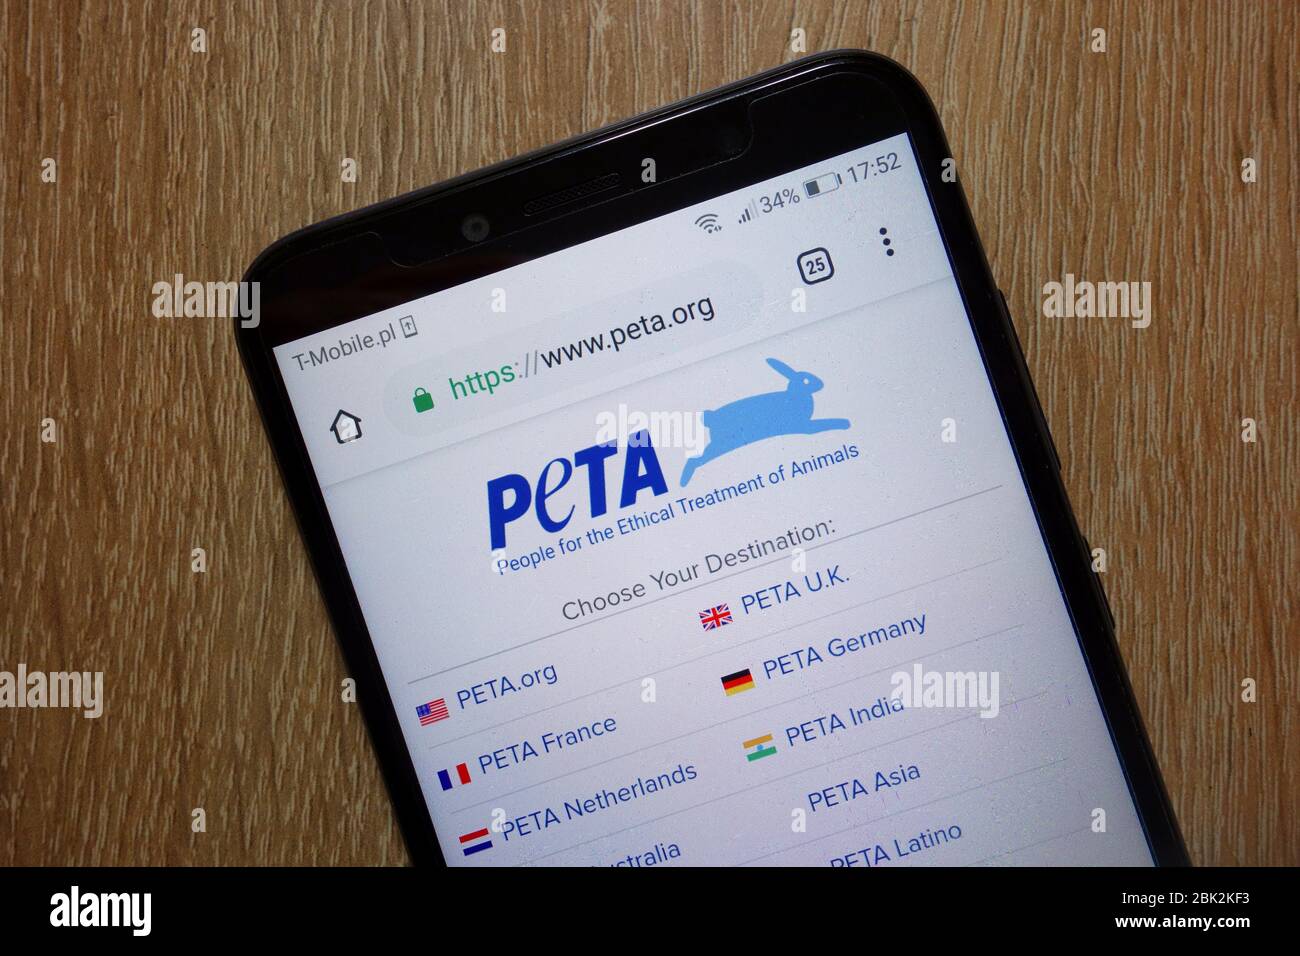 People for the Ethical Treatment of Animals organization website (www.peta.org) displayed on smartphone Stock Photo